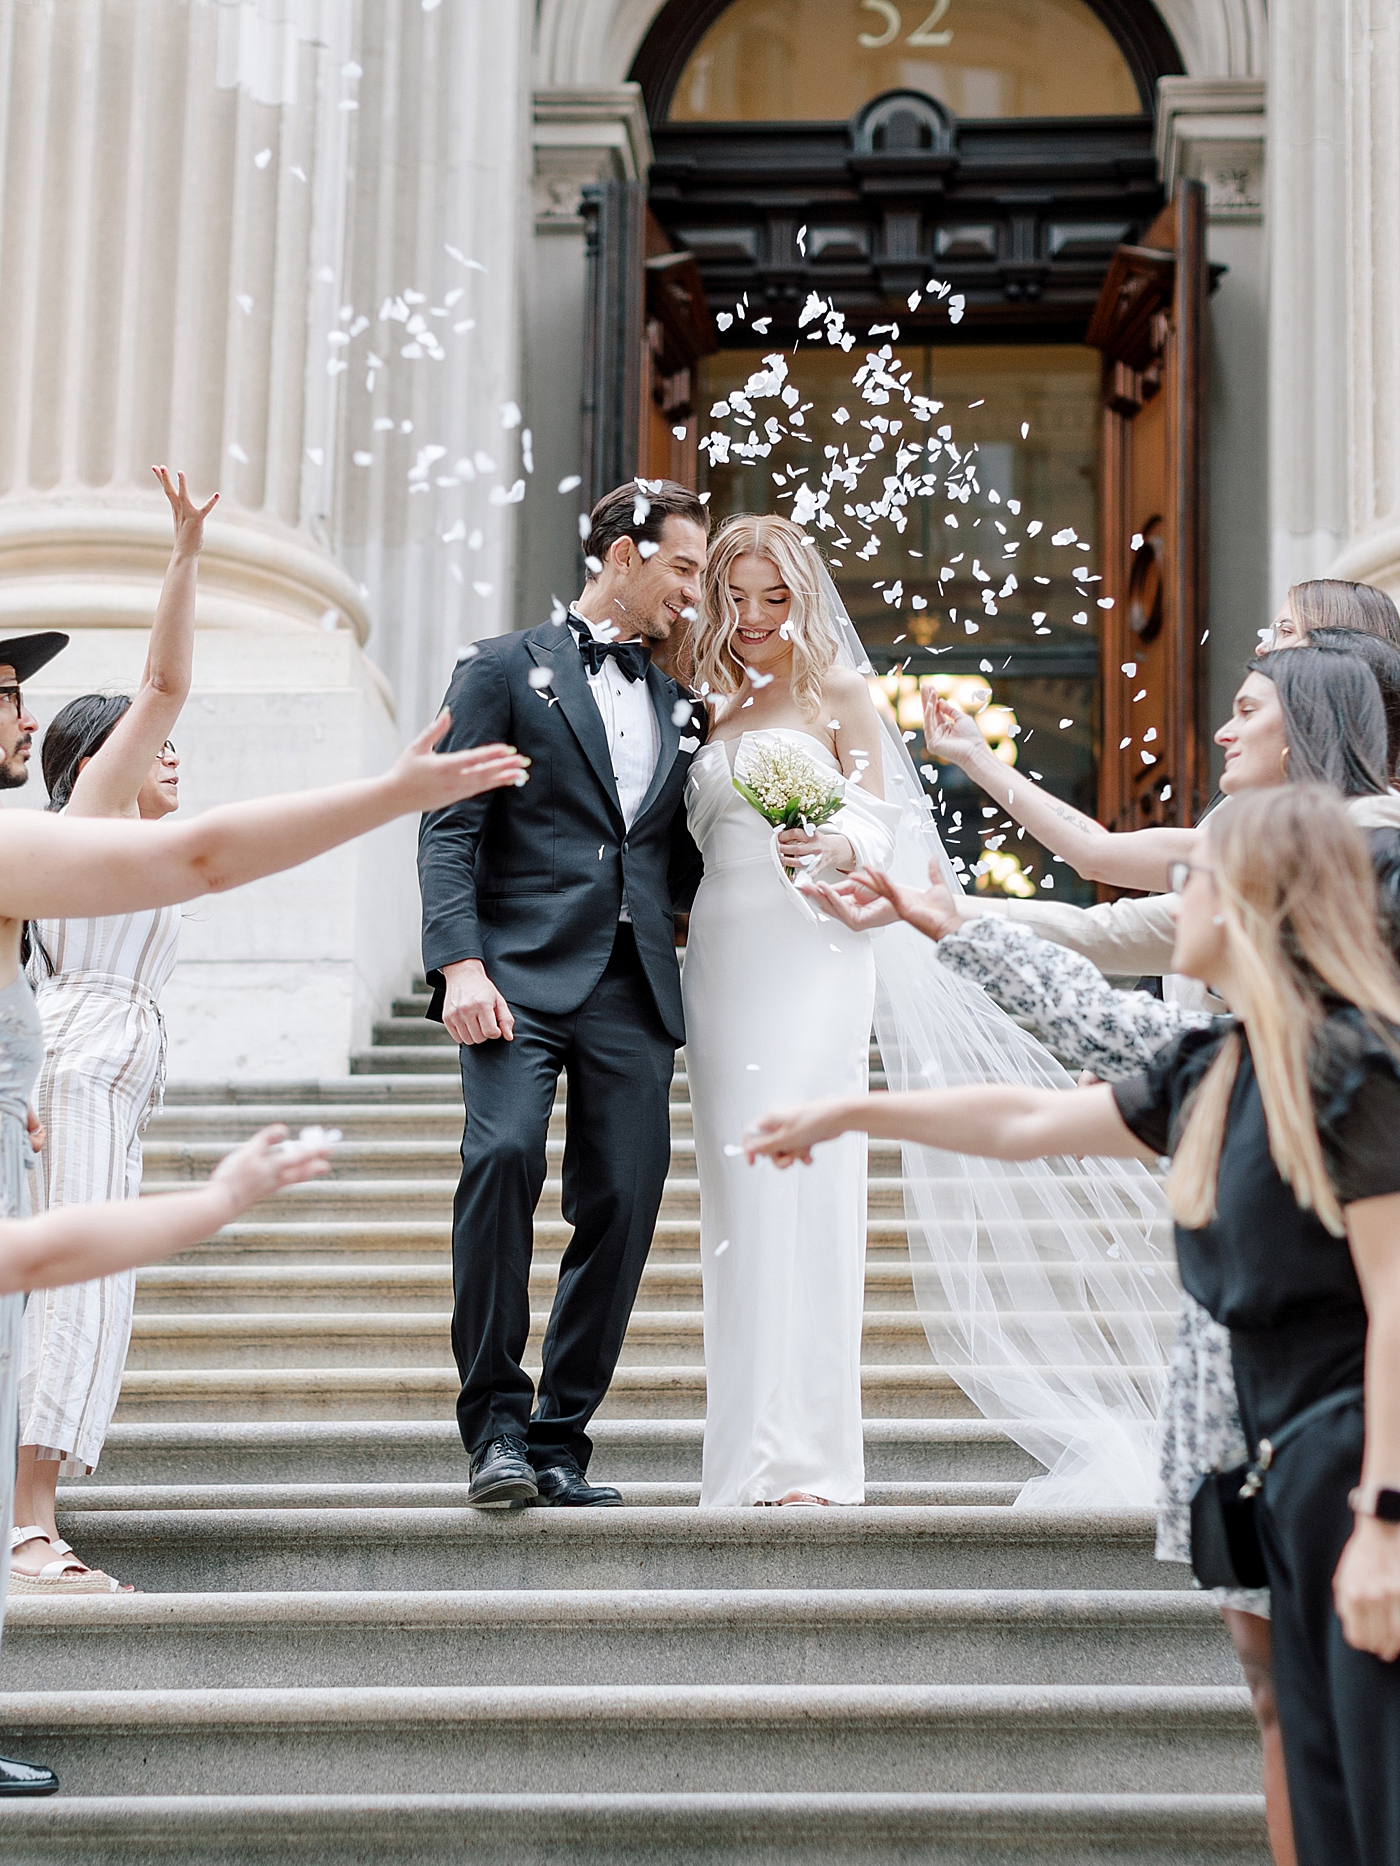 Bride and groom walking through confetti after their wedding | Photo by NYC Wedding Photographer Hope Helmuth 